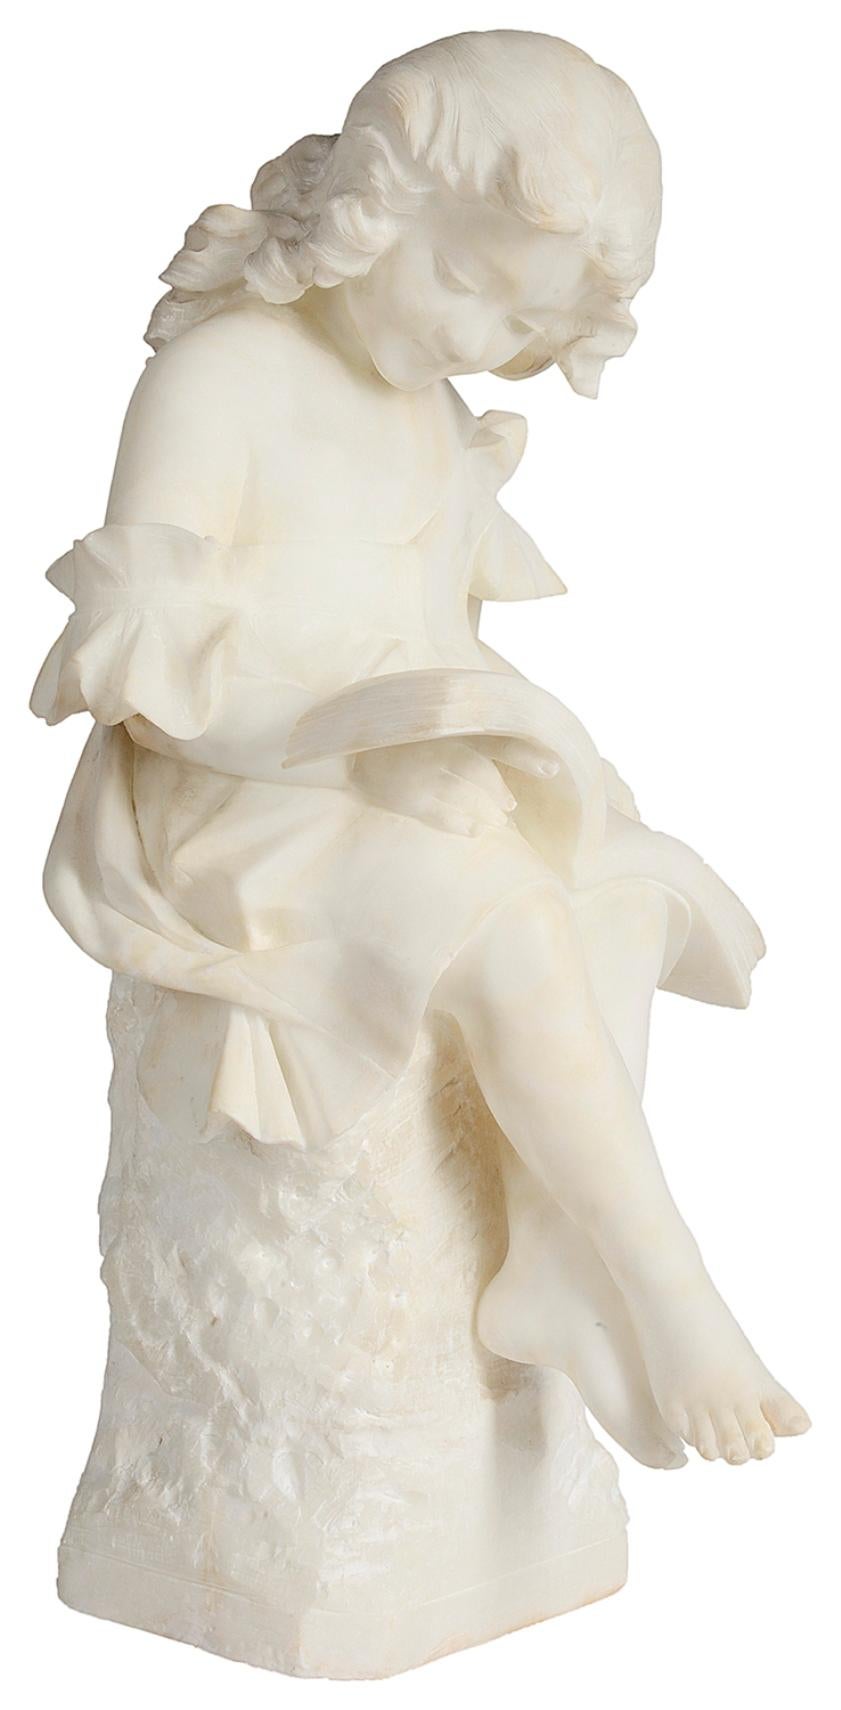 A very good quality 19th century Italian carved alabaster study of a young girl seated, reading a book.